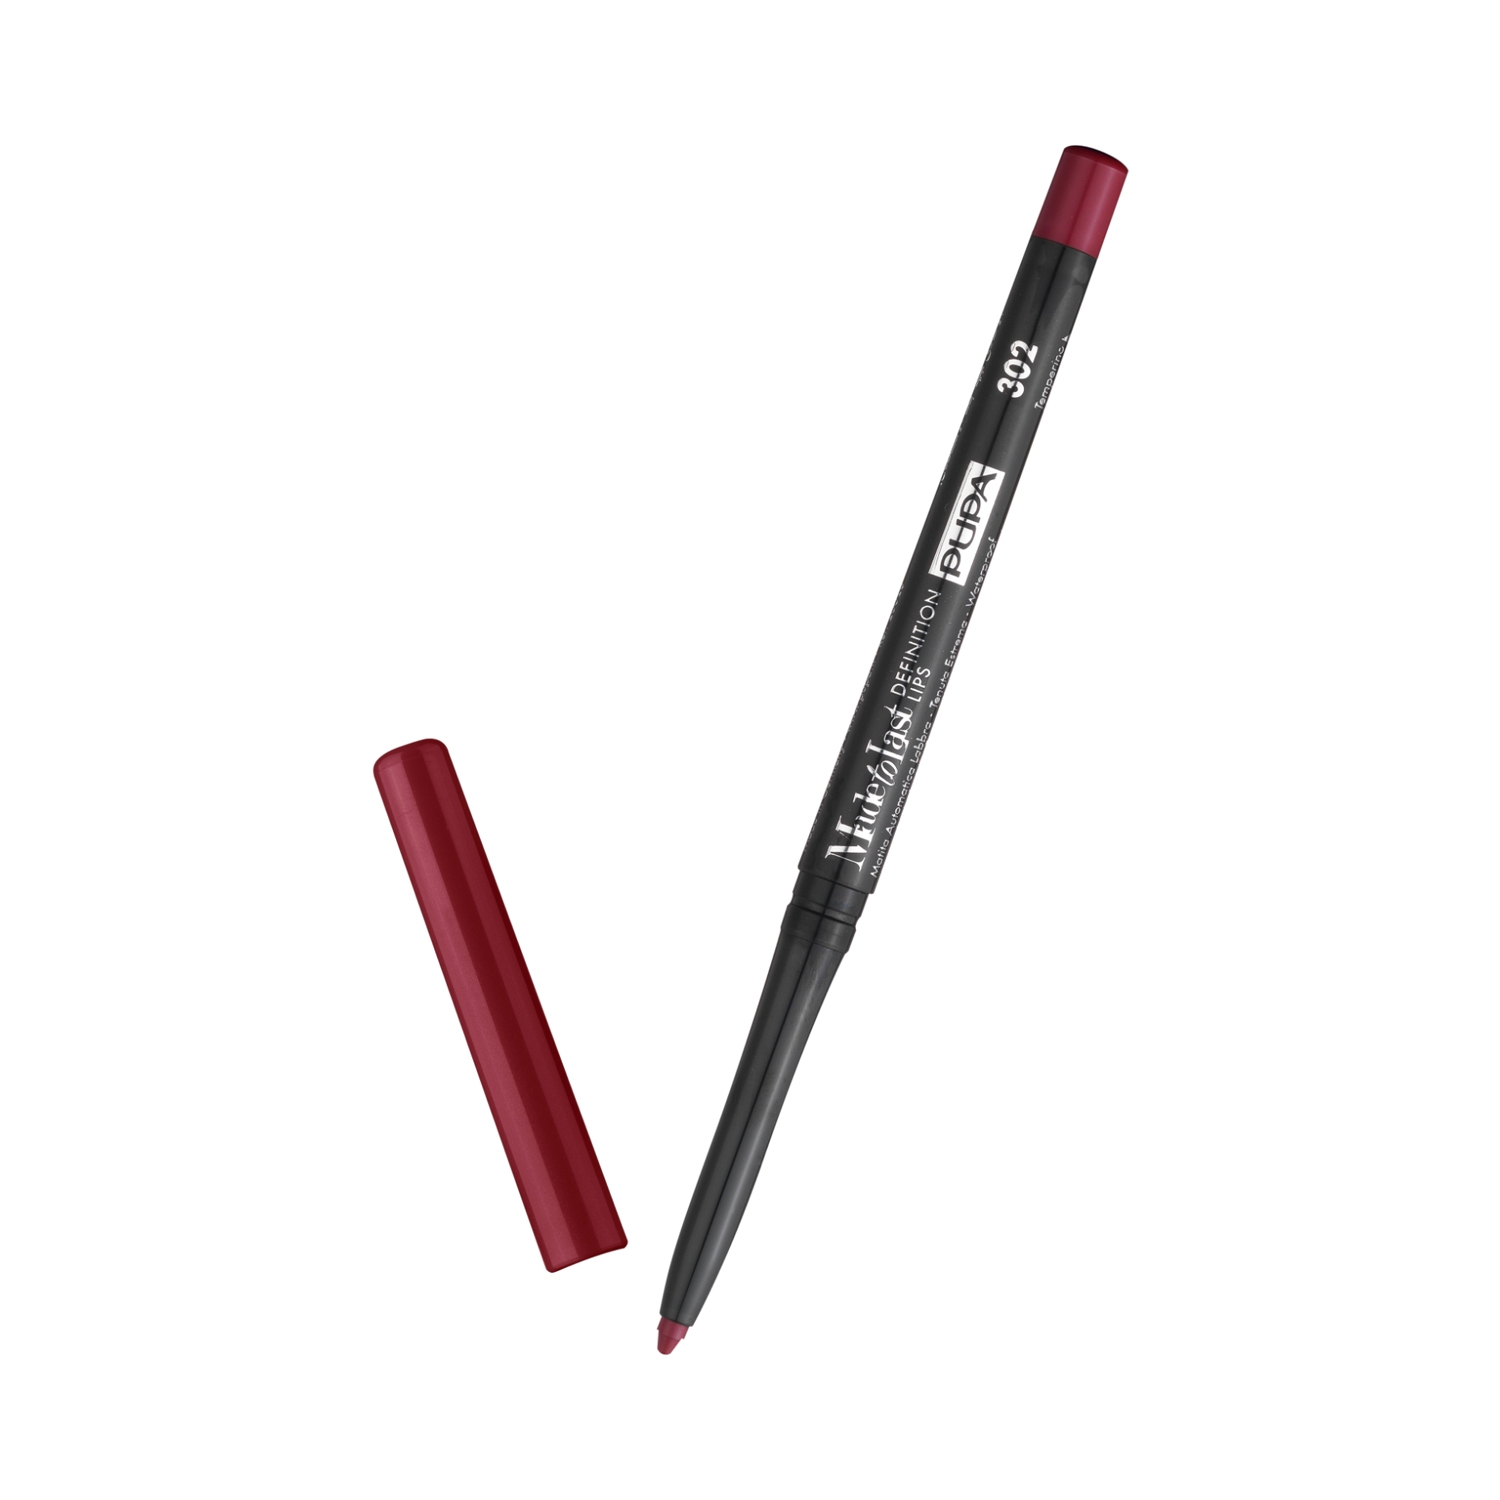 Pupa Milano Made To Last Definition Lip Pencil - 302 Chic Burgundy (0.35g)